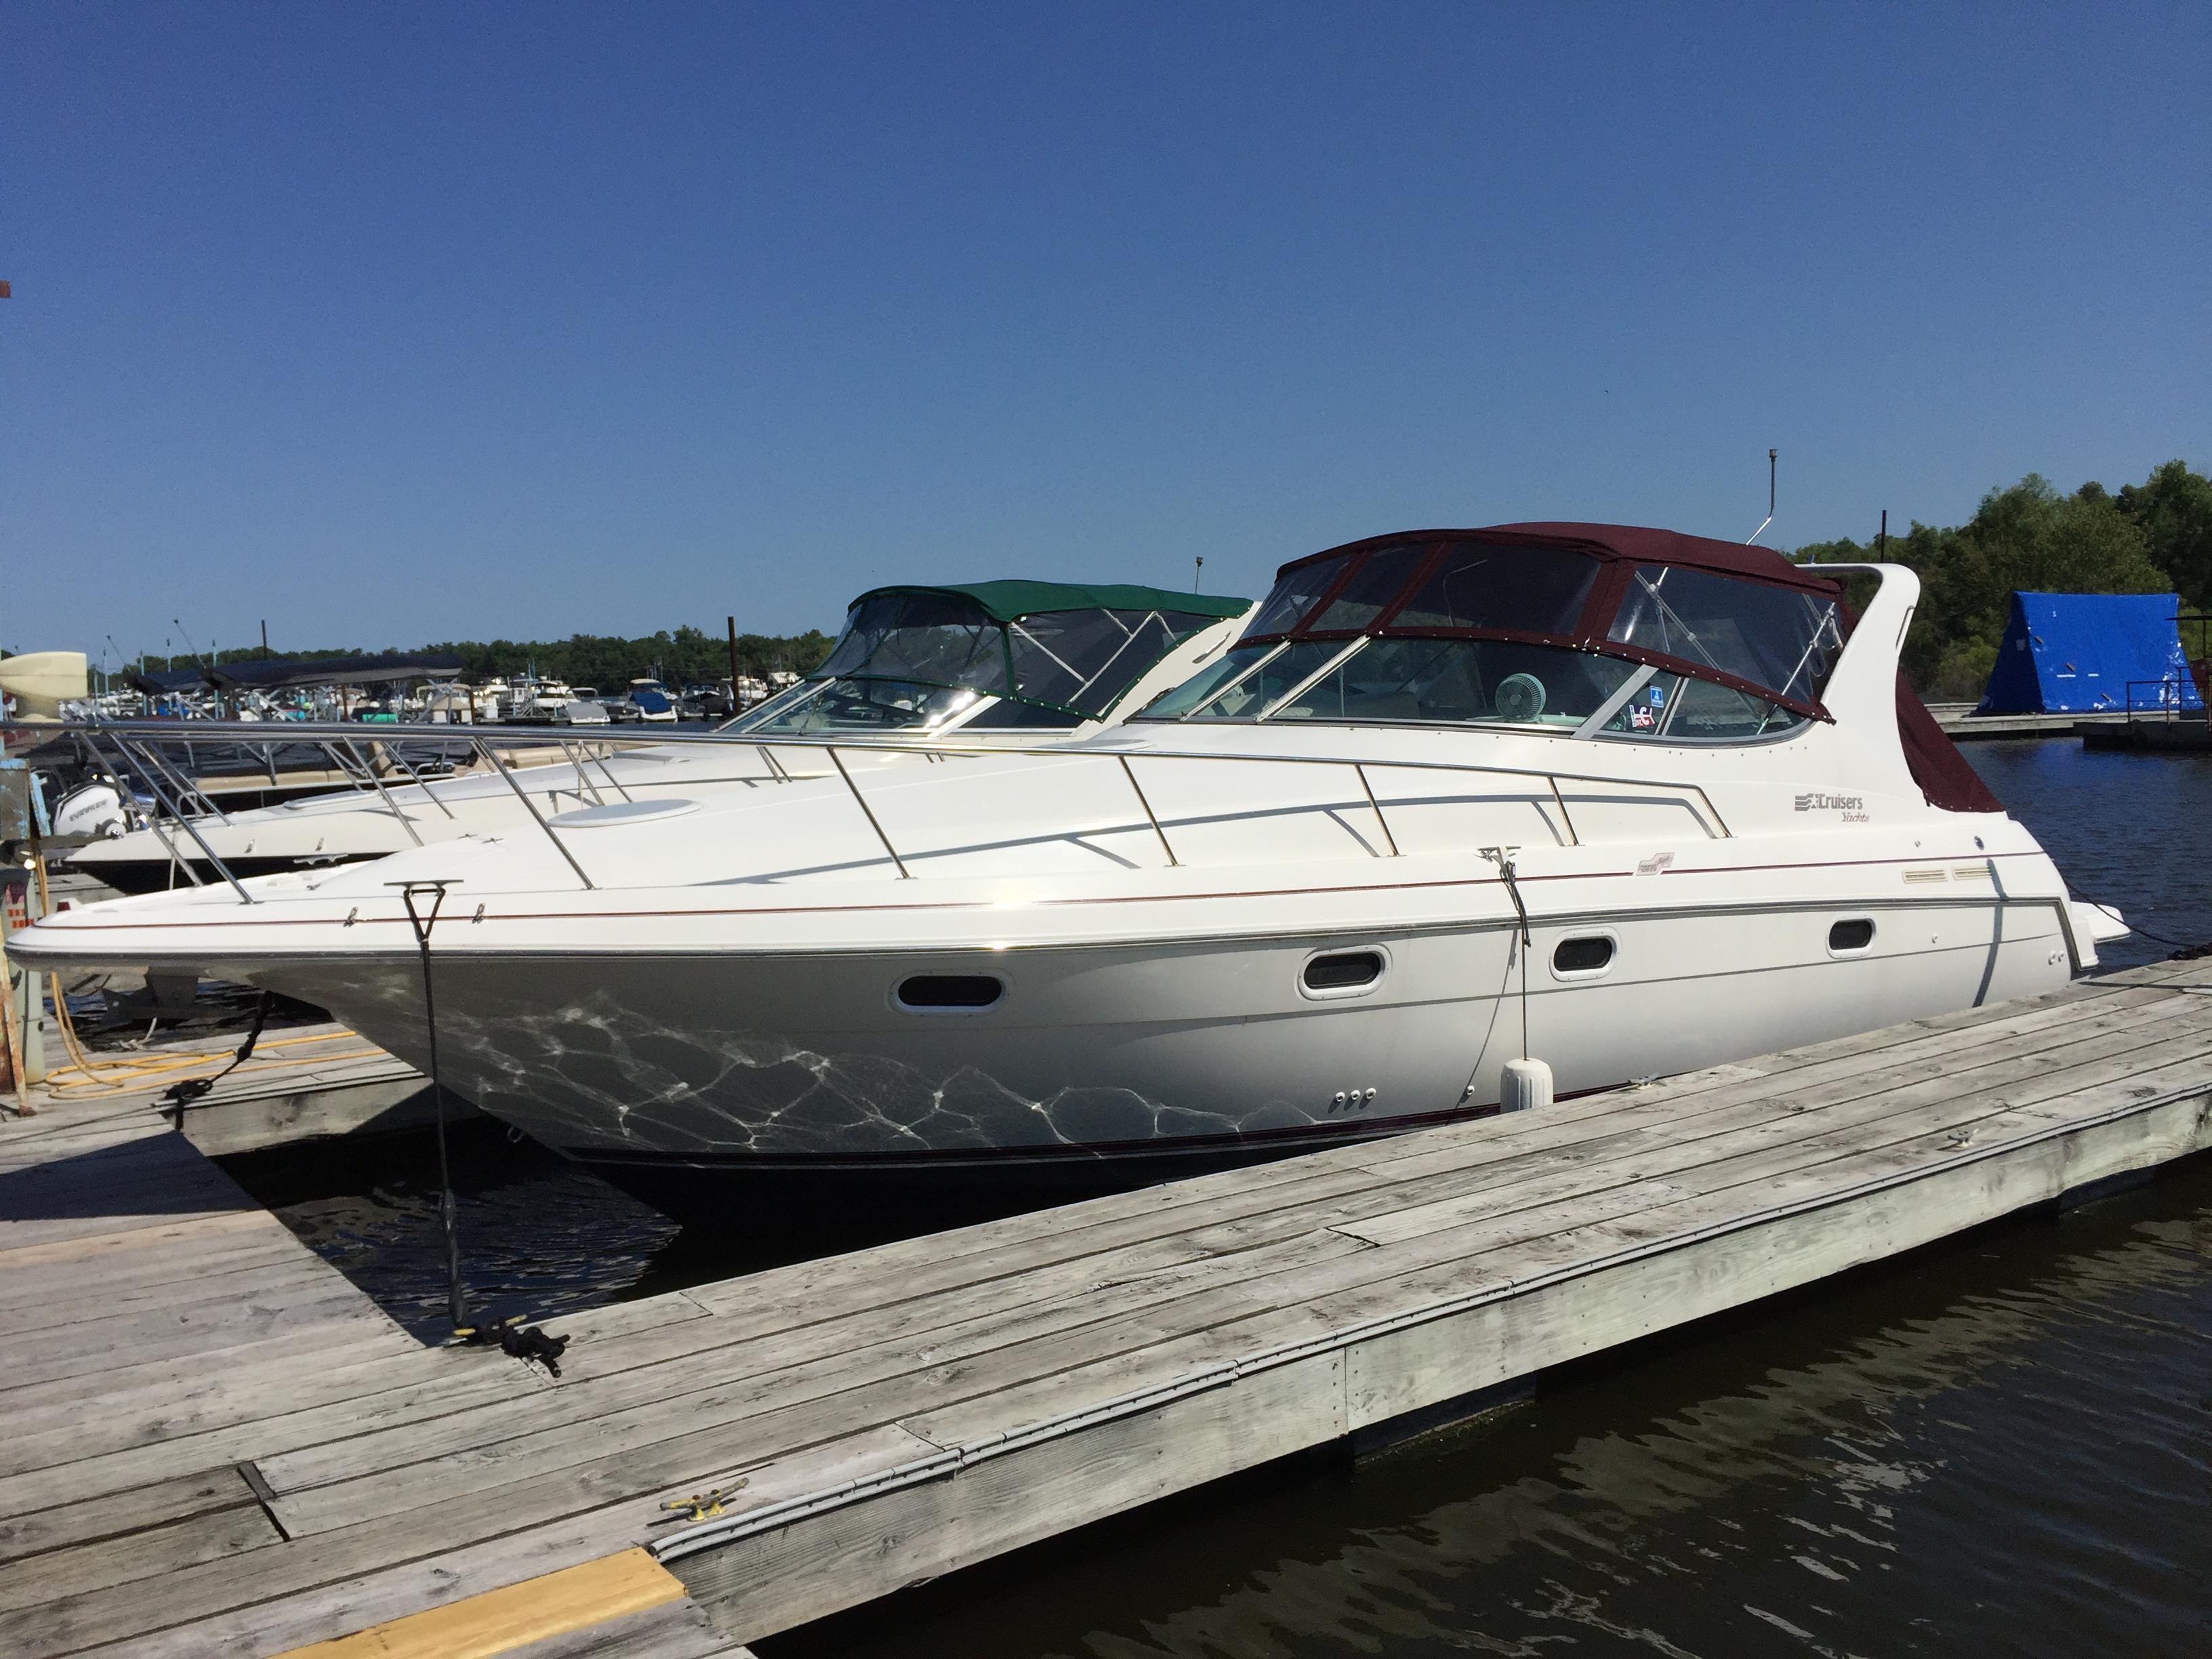 yachts for rent in minnesota